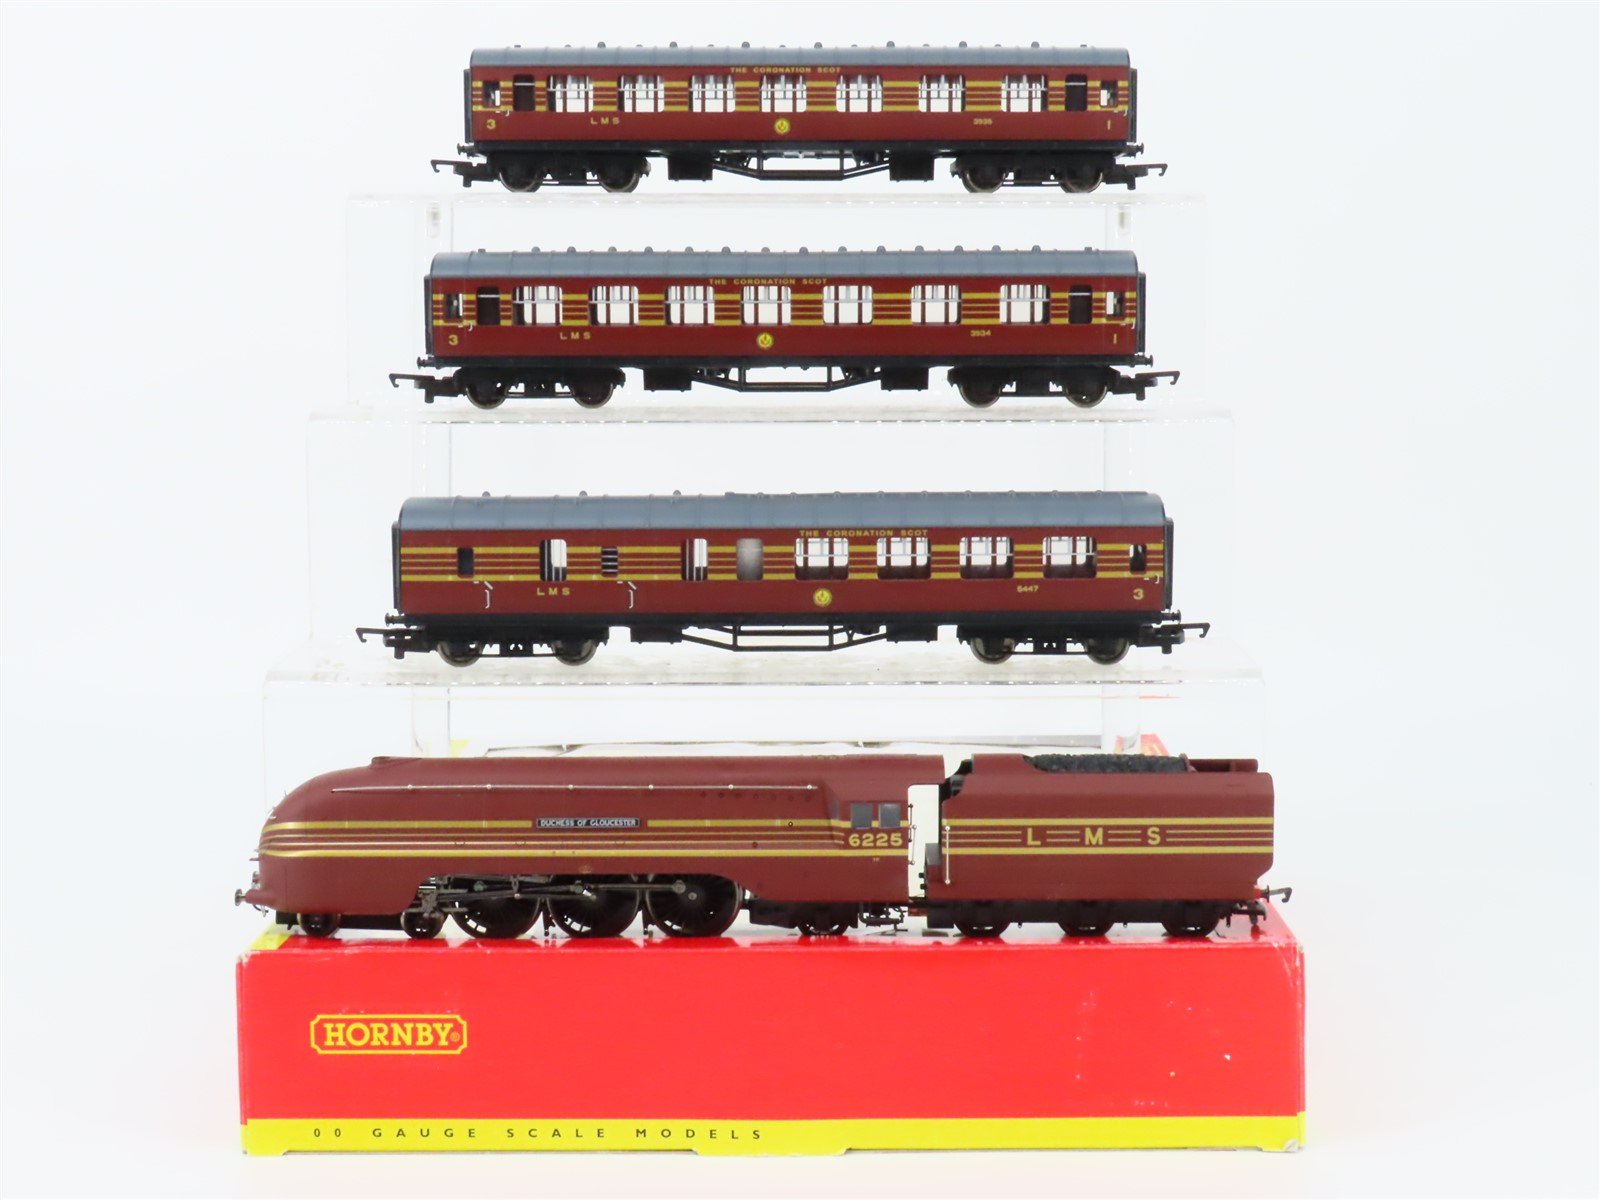 OO Scale Hornby LMS British "The Coronation Scot" 4-6-2 Steam Passenger Set